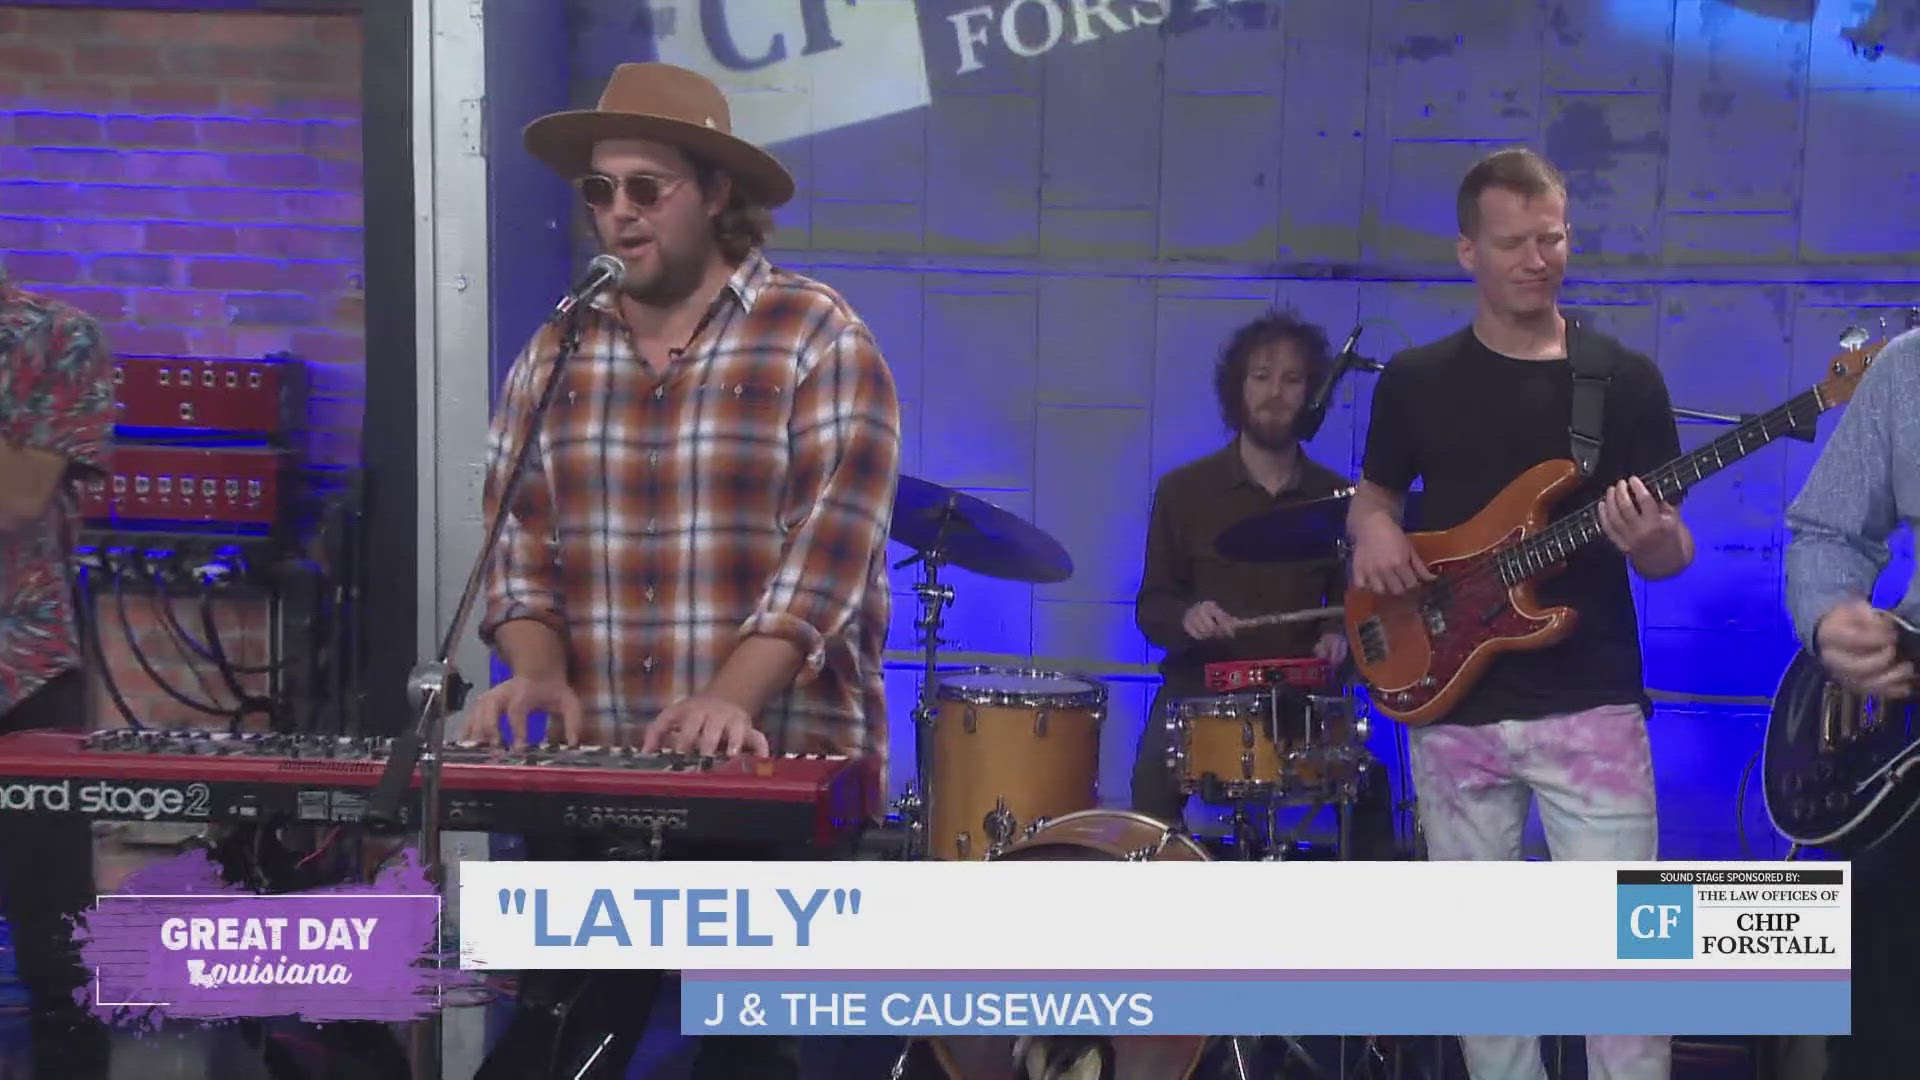 J & The Causeways perform "Lately" in our Chip Forstall Sound Stage.